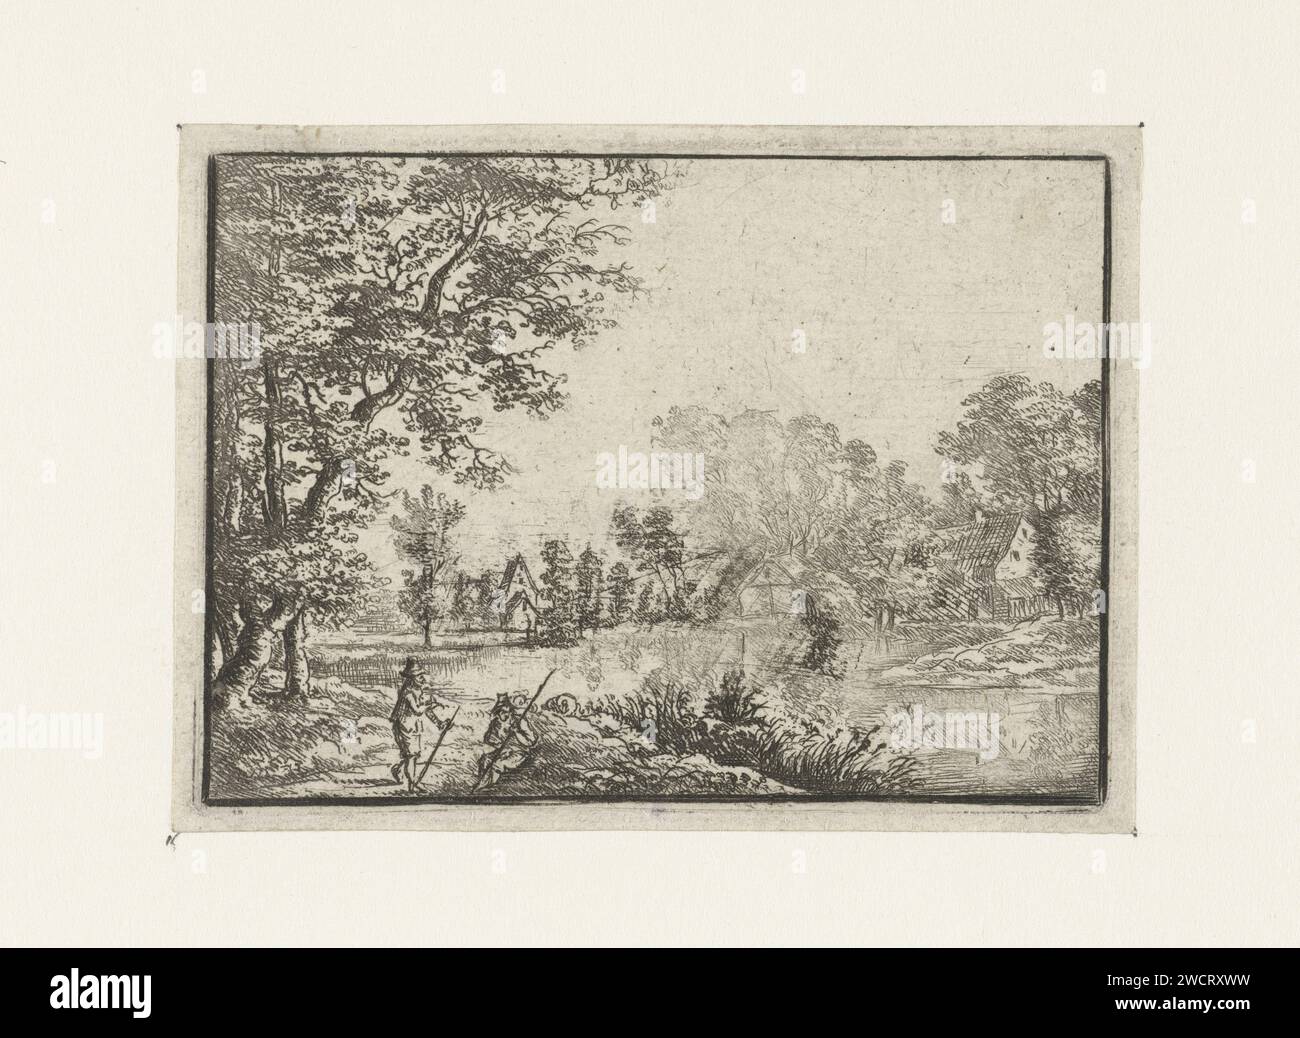 Landscape with a village and two men, Jan Carel Immenraet (attributed to), 1662 - 1663 print A village on a river, two men on the bank.  paper etching / engraving village. river Stock Photo